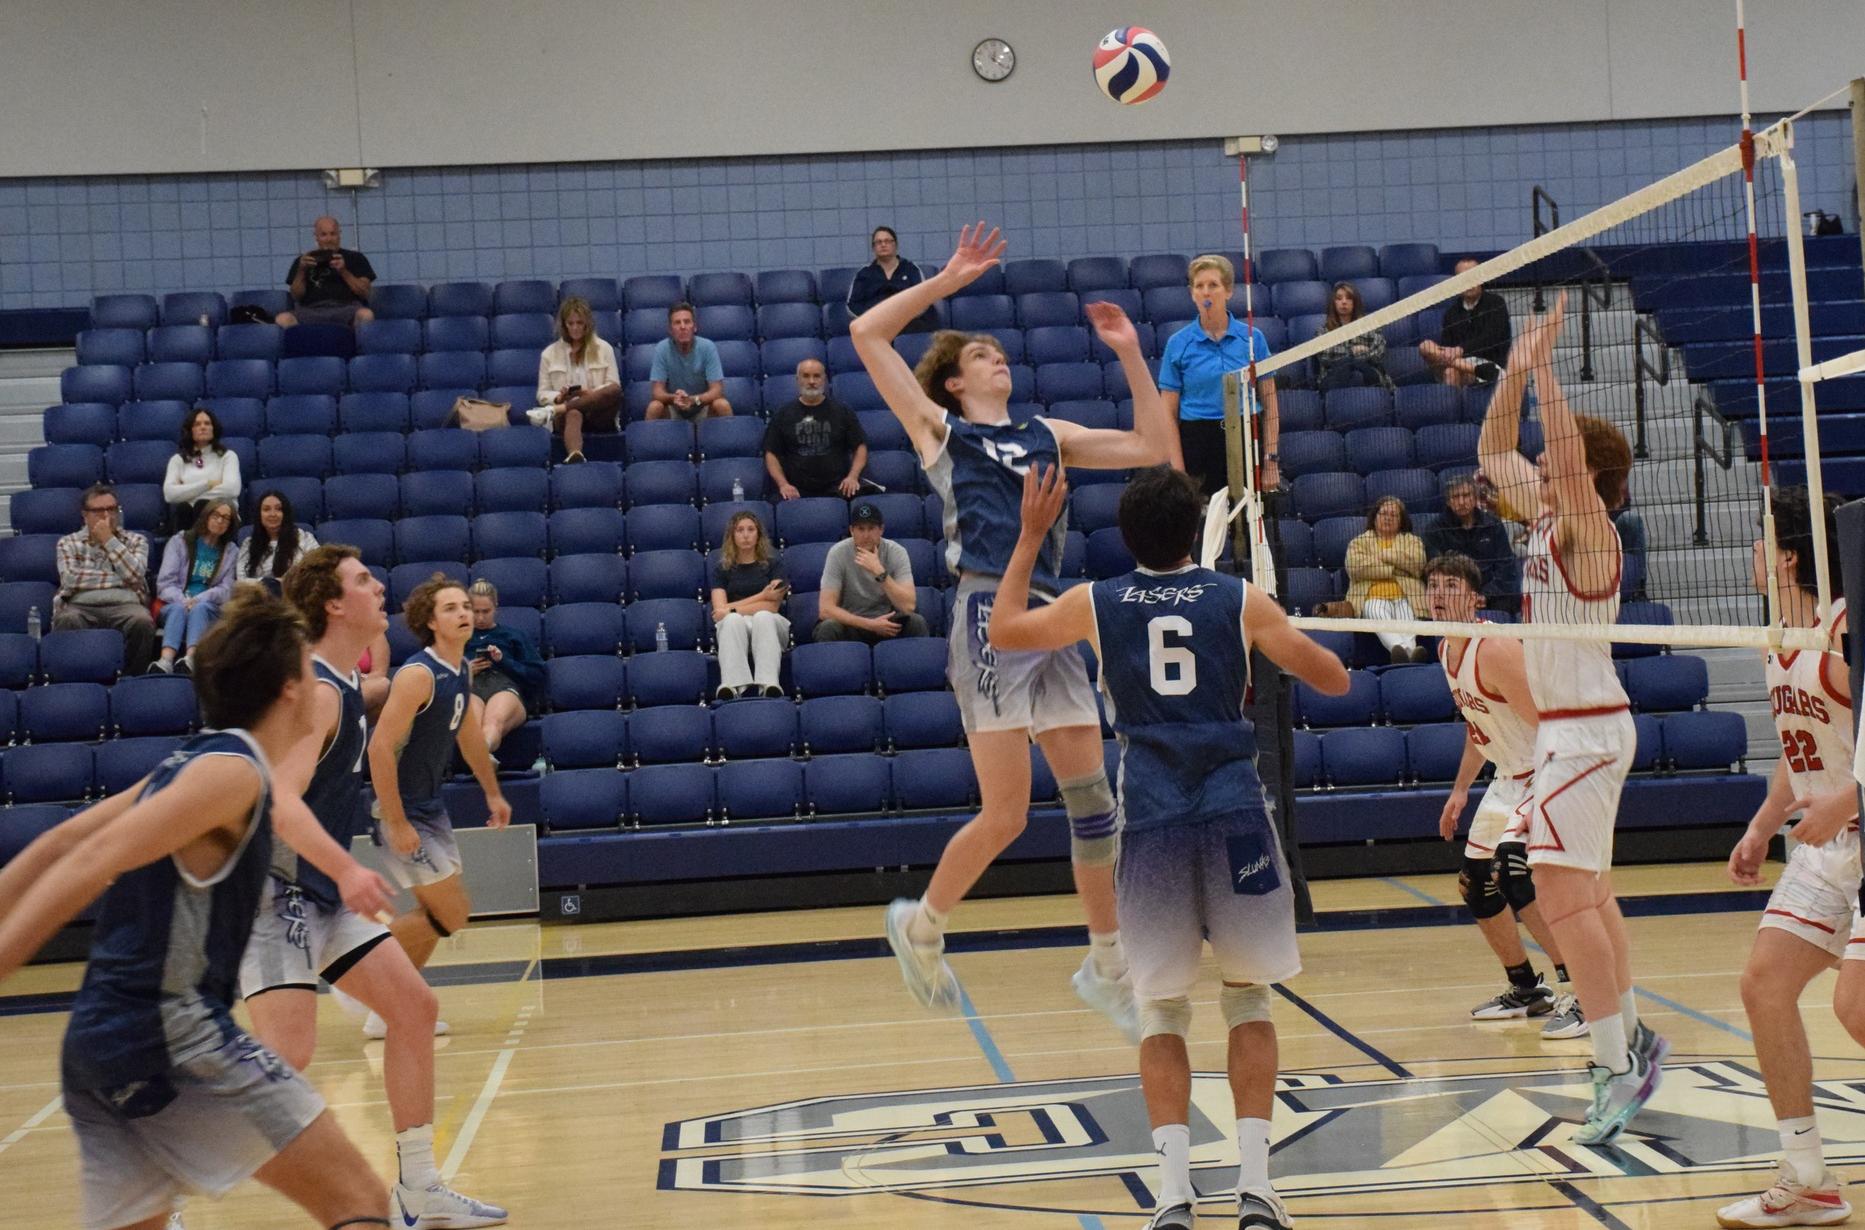 Men's volleyball team earns its biggest win of the season